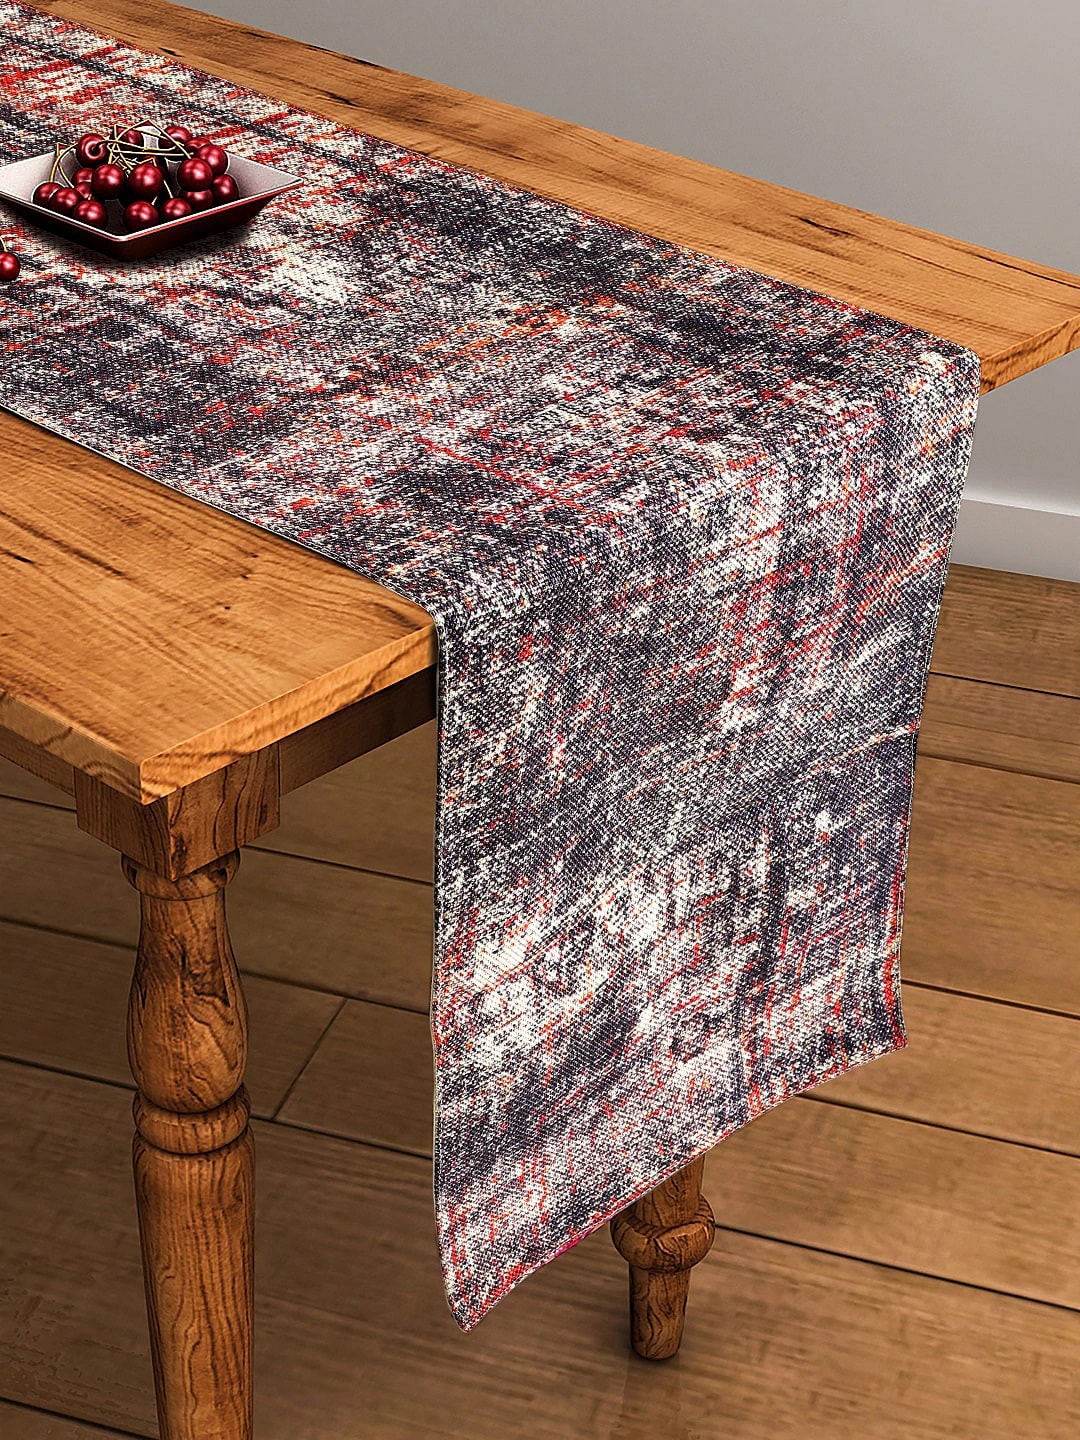 BELLA TRUE Off-White & Black Abstract Digital Printed Rectangular Table Runner Price in India